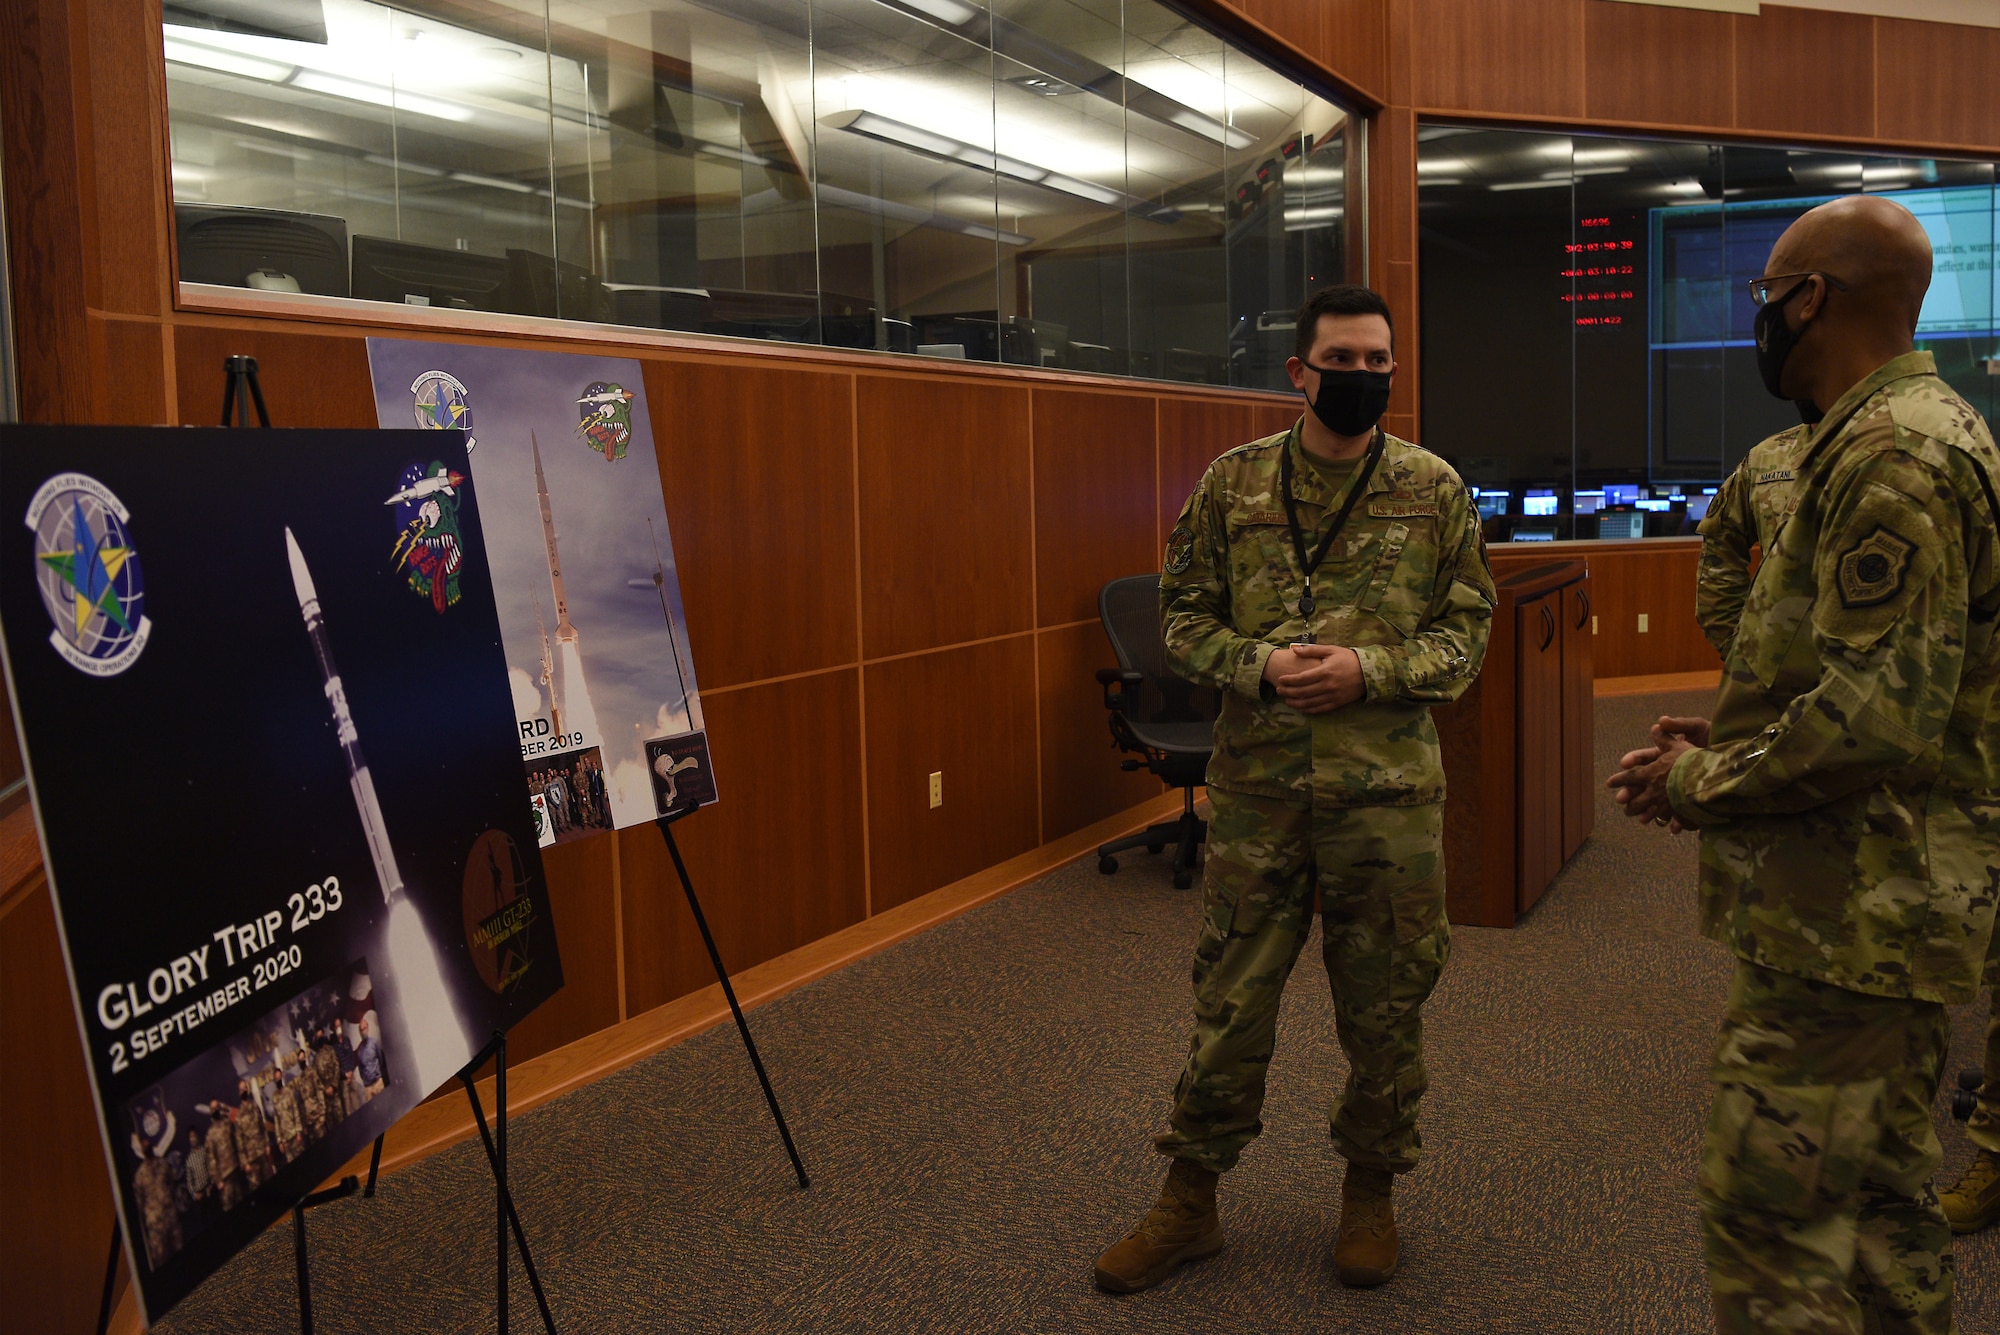 U.S Air Force Chief of Staff Gen. Charles Q. Brown, Jr., speaks with Capt. Adrian Catarius, 2nd Range Operations Squadron director of engineering, while touring the Western Range Operations Control Center Oct. 27, 2020, at Vandenberg Air Force Base, Calif.